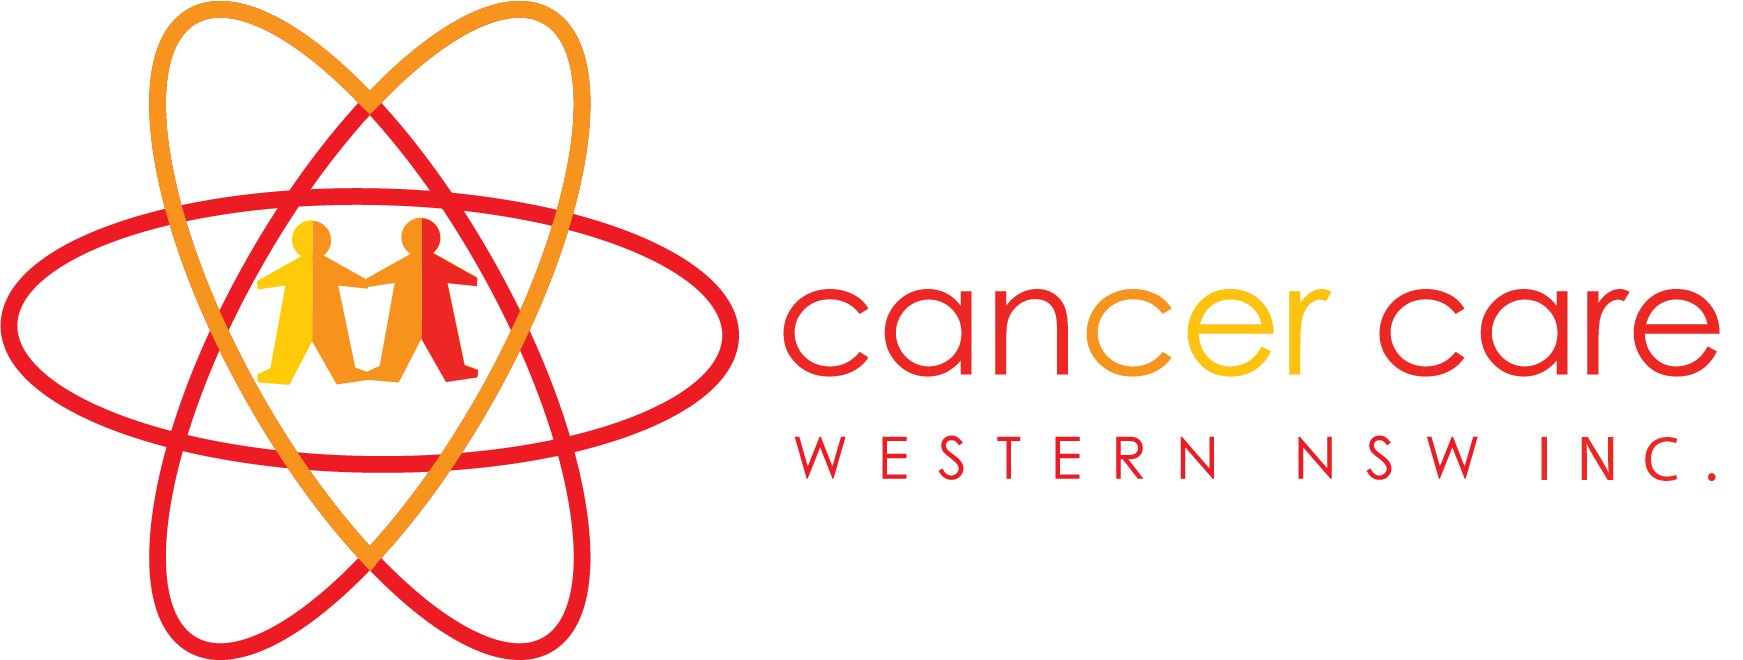 Cancer Care Western NSW Inc.